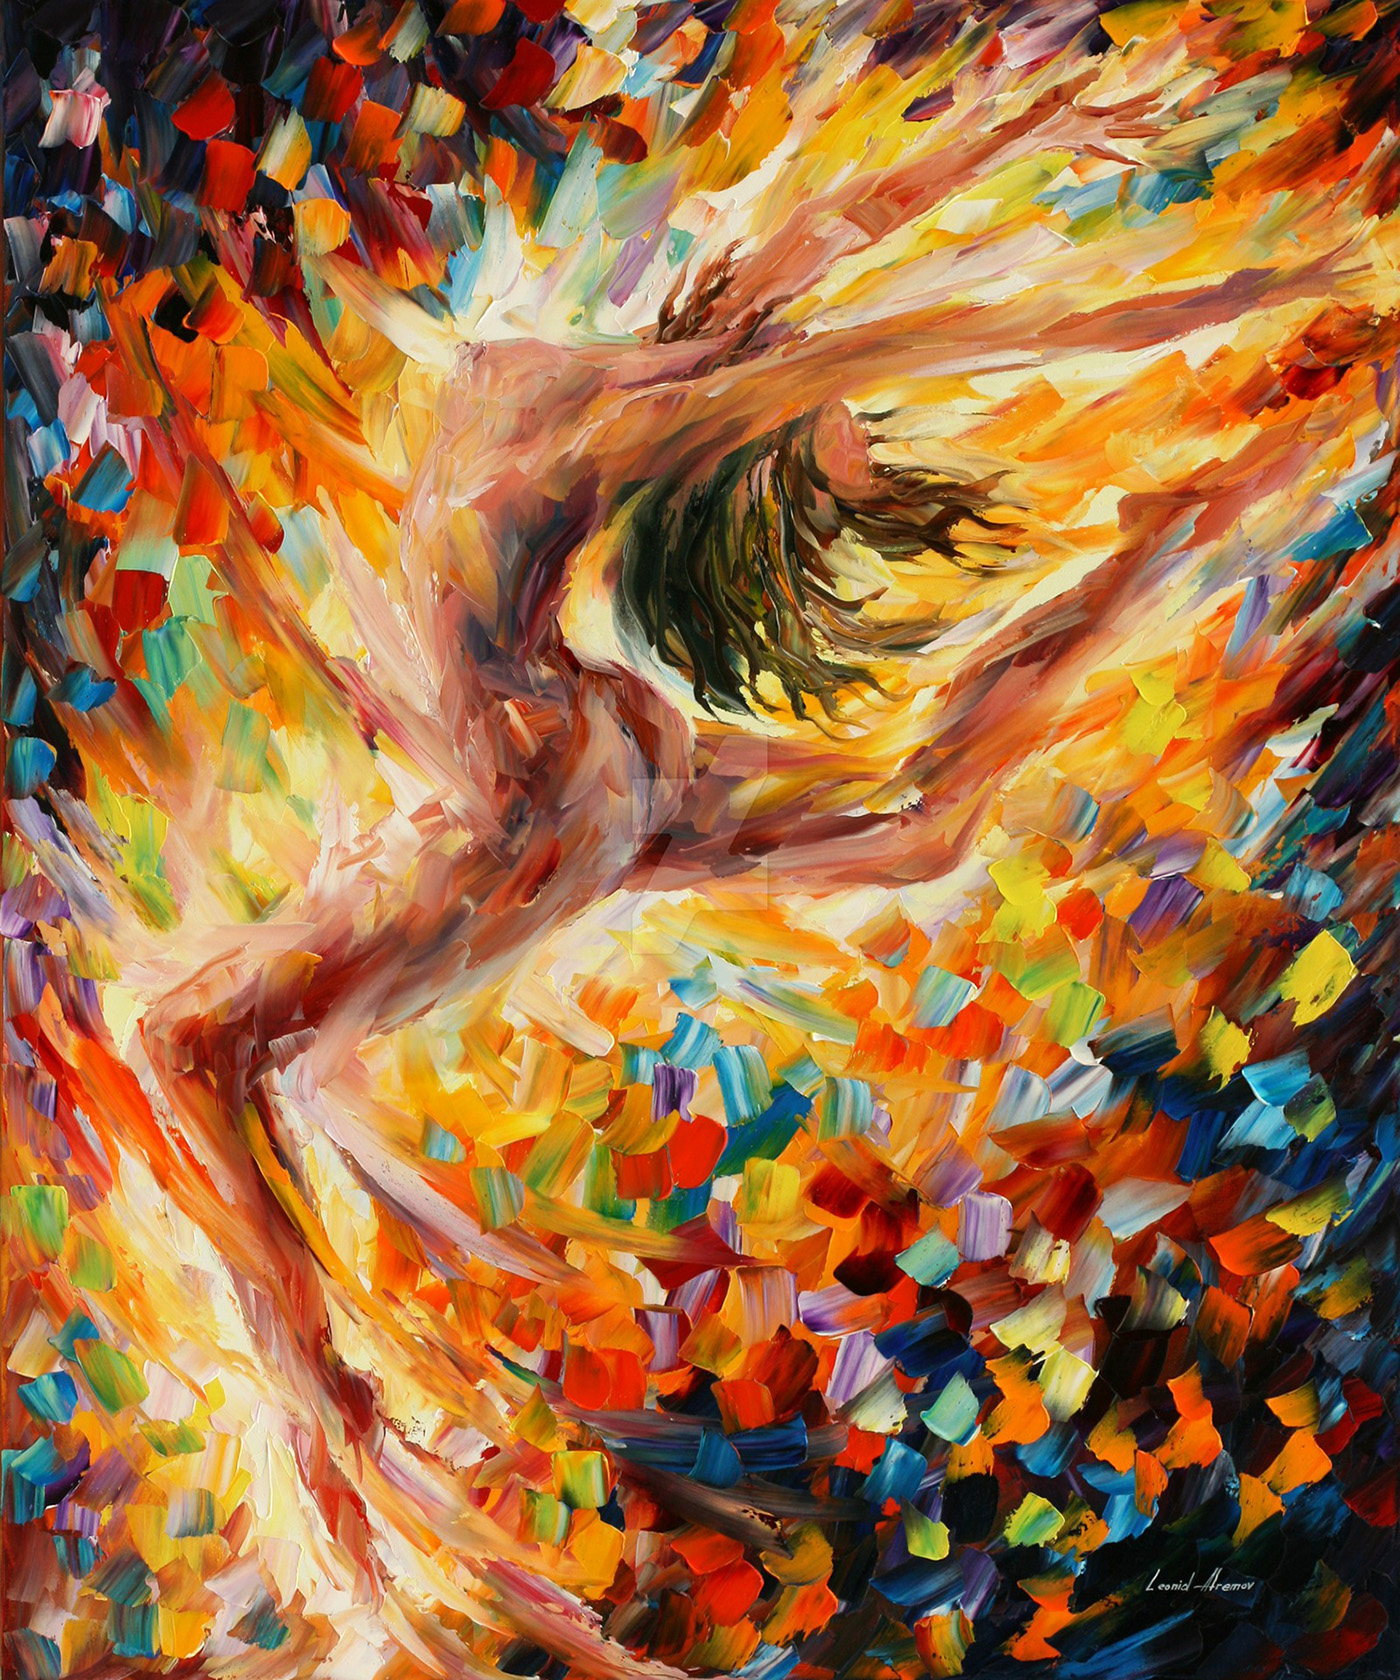 Leonid Afremov Archives Hd Wallpapers